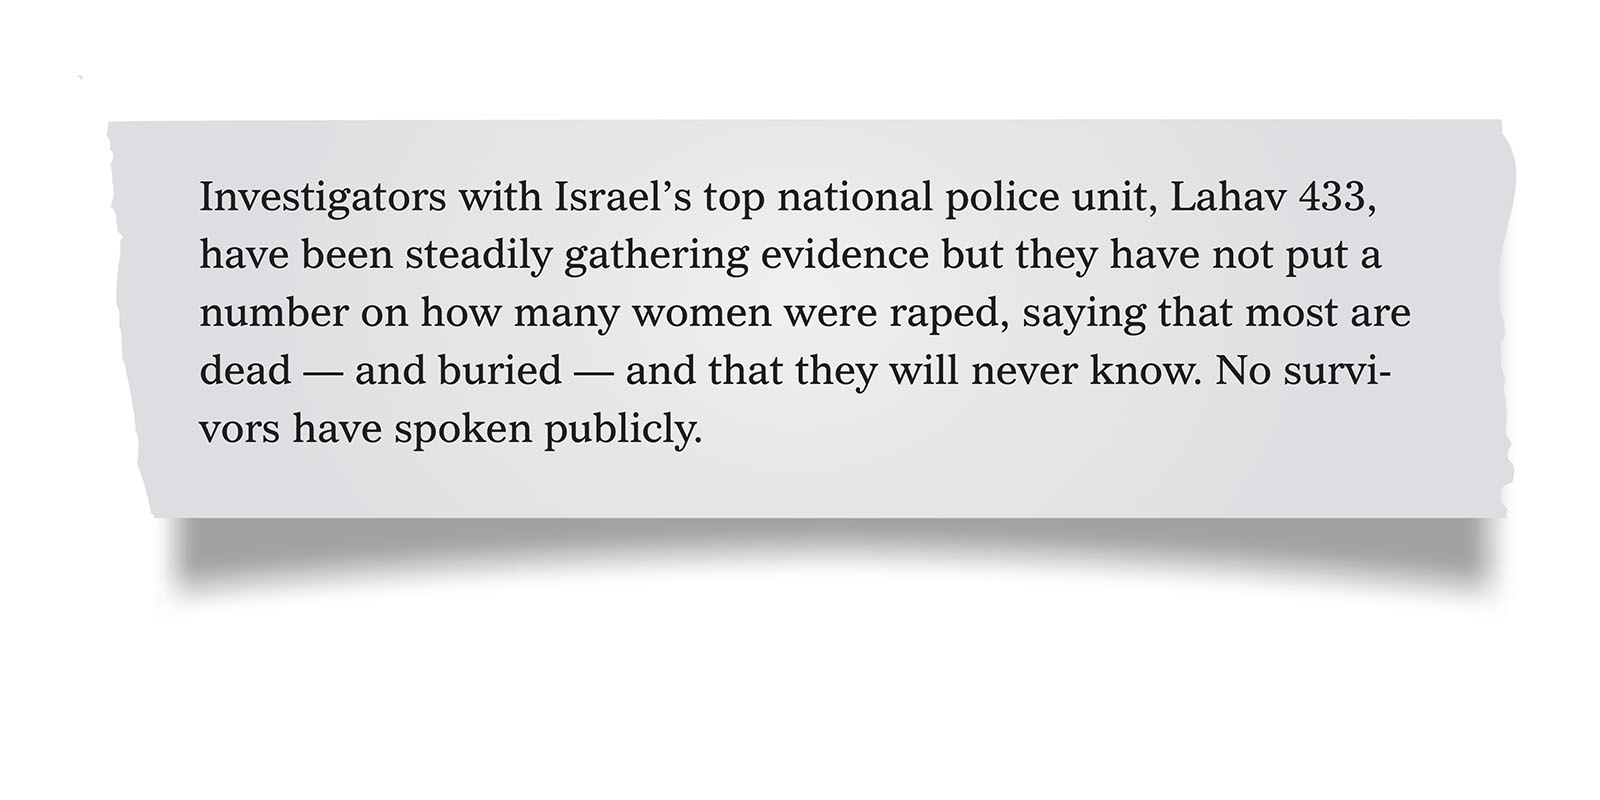 Pull quote:
Investigators with Israel’s top national police unit, Lahav 433, have been steadily gathering evidence but they have not put a number on how many women were raped, saying that most are dead — and buried — and that they will never know. No survivors have spoken publicly.